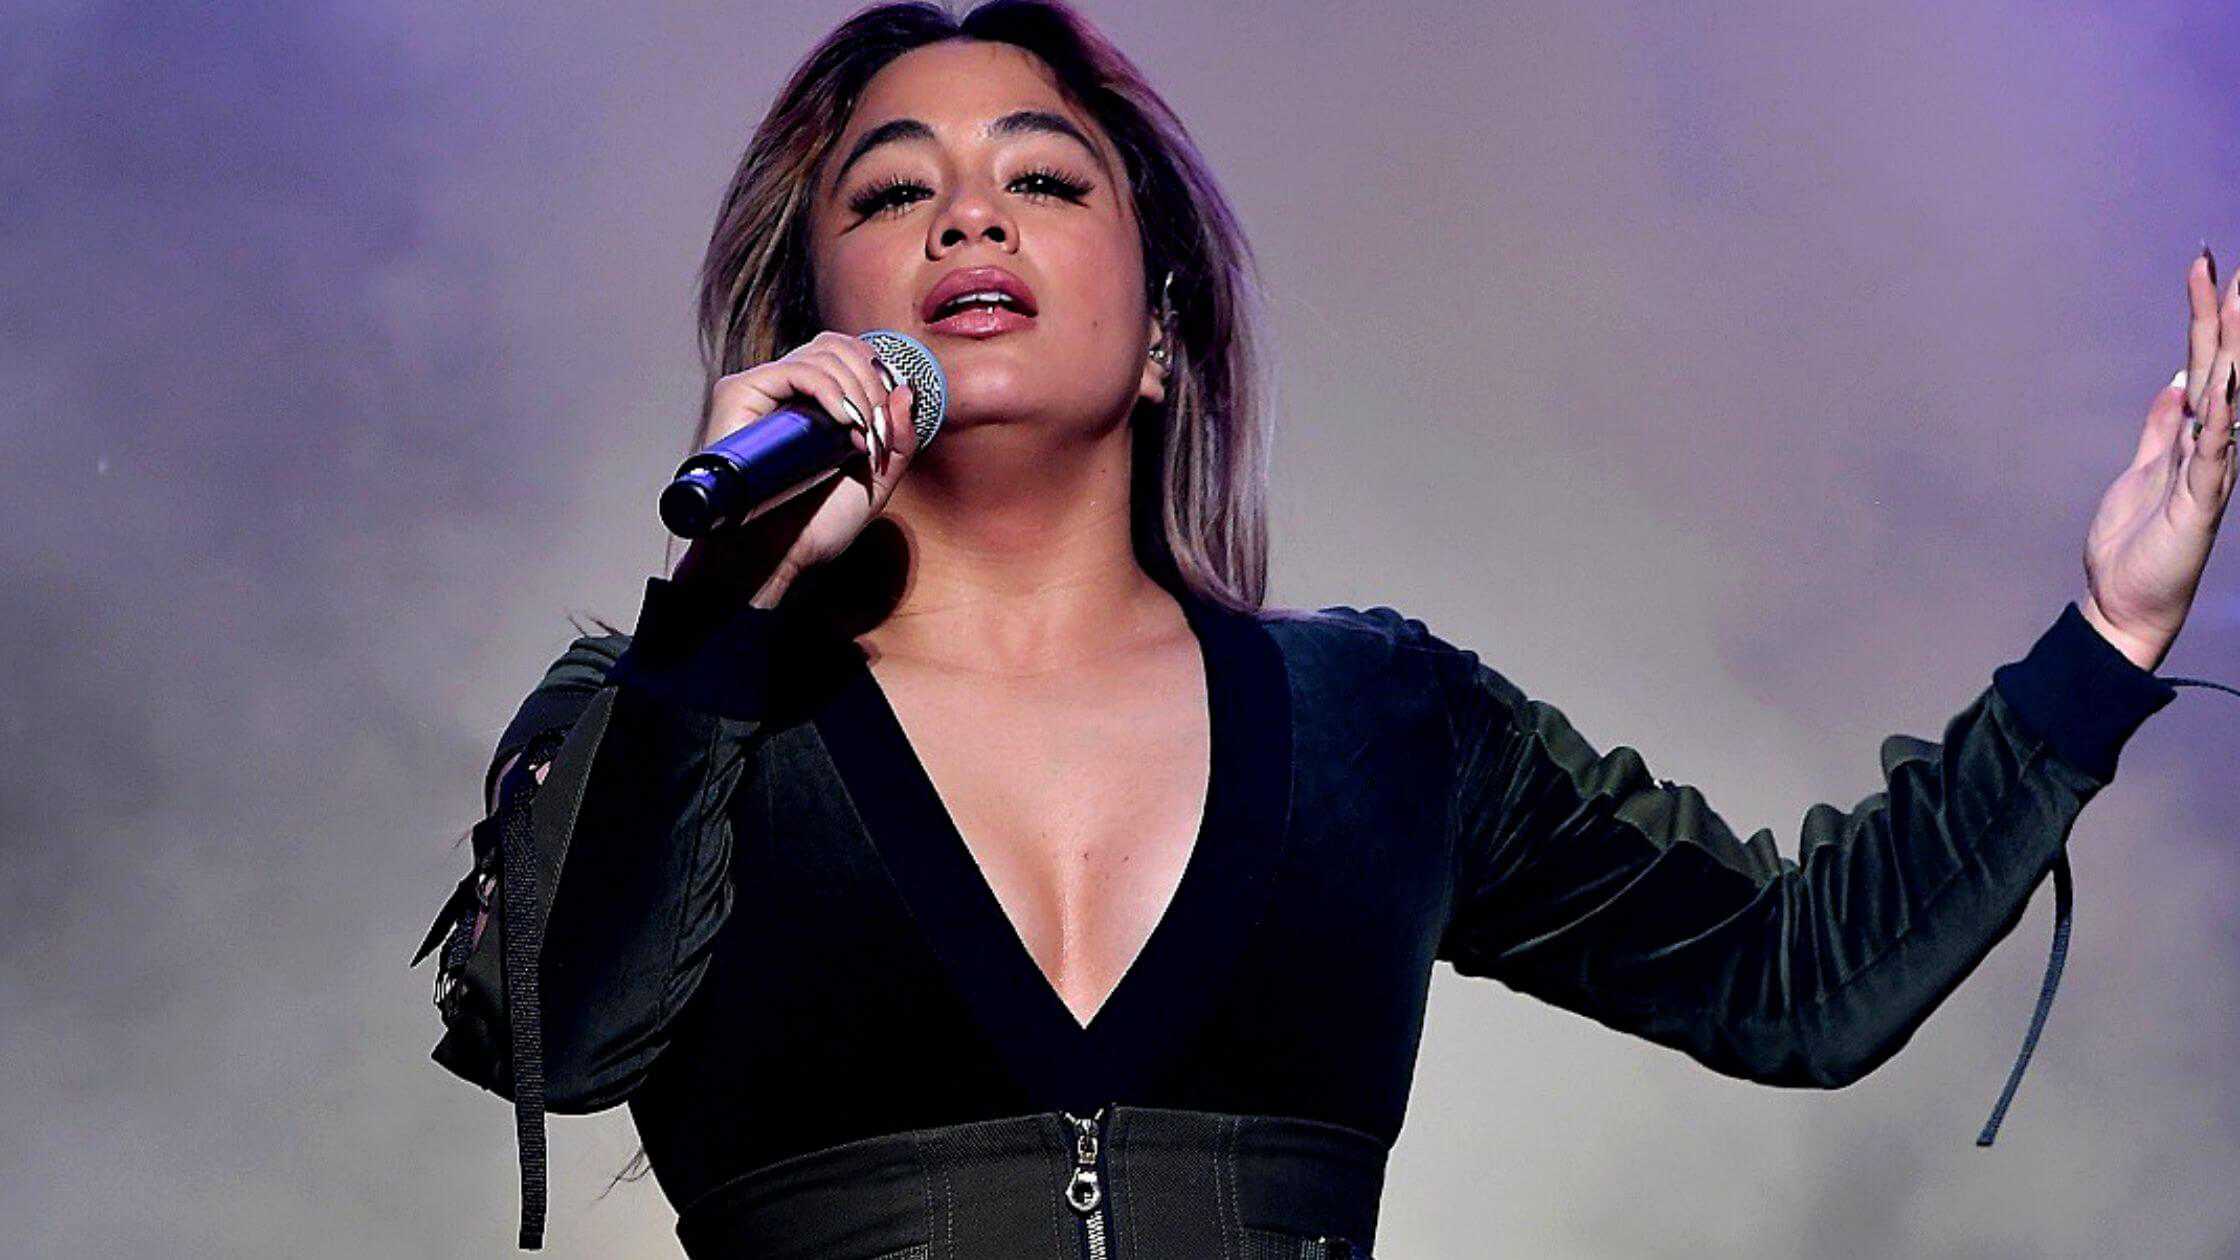 A Migraine Nearly Forced Ally Brooke To Cancel A Concert